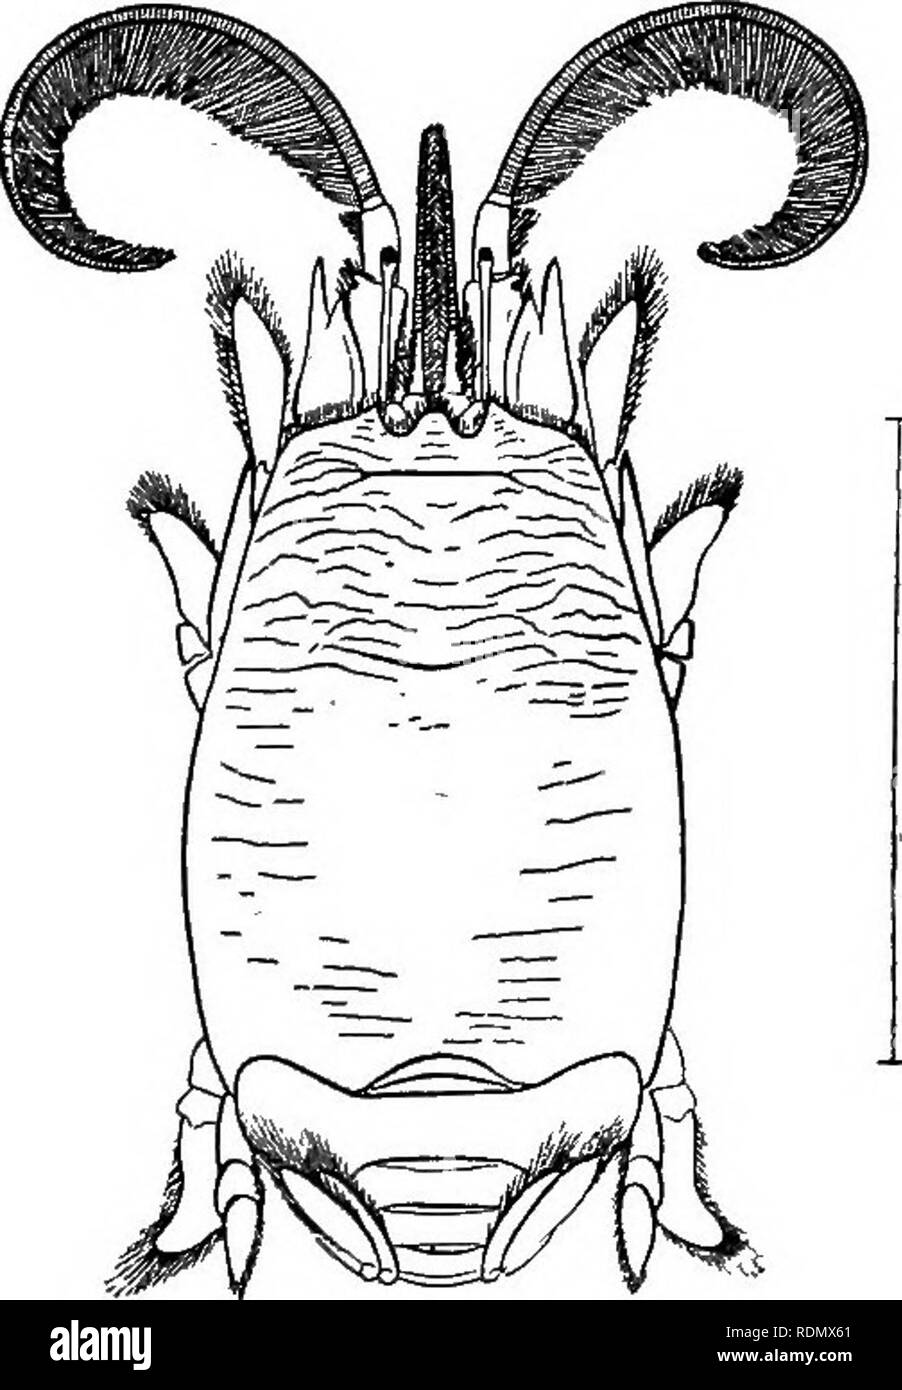 . Higher Crustacea of New York city. Crustacea. HIGHER CRUSTACEA OF NEW YORK CITY 135 3 THALASSINIDEA Moderate sized forms with two longitudinal dorsal sutures and with a cervical suture frequently present. First thoracic legs usually large and chelate. Abdomen large. Burrowing forms. Representatives of this group have not so far been taken within the city limits, but species of the genera Callianassa and Gebia may possibly be found. They inhabit deep burrows in the mud or muddy Sand' 4 ANOMURA Aberrant forms, at one time placed in a class by themselves but now united with the Macrura. Its pri Stock Photo